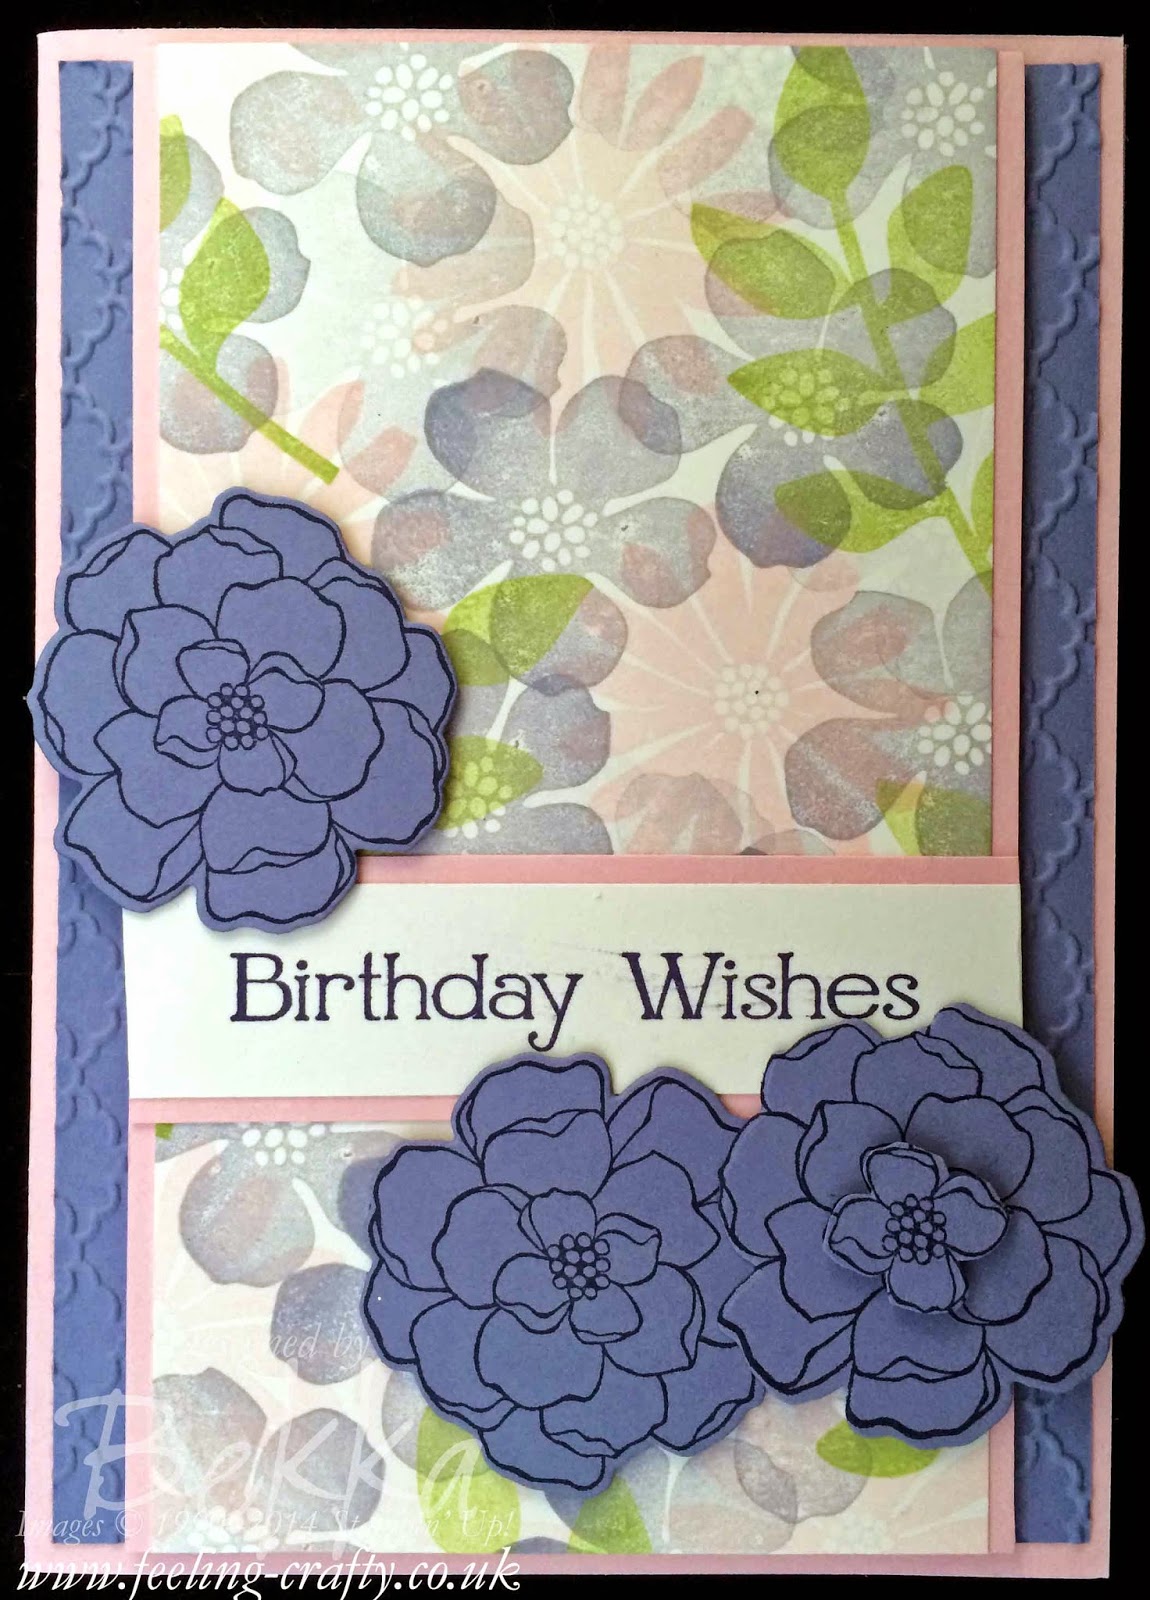 A technique for getting going with new stamps created this birthday card made using Secret Garden Stamps and Framelits from Stampin' Up!  Check it out!